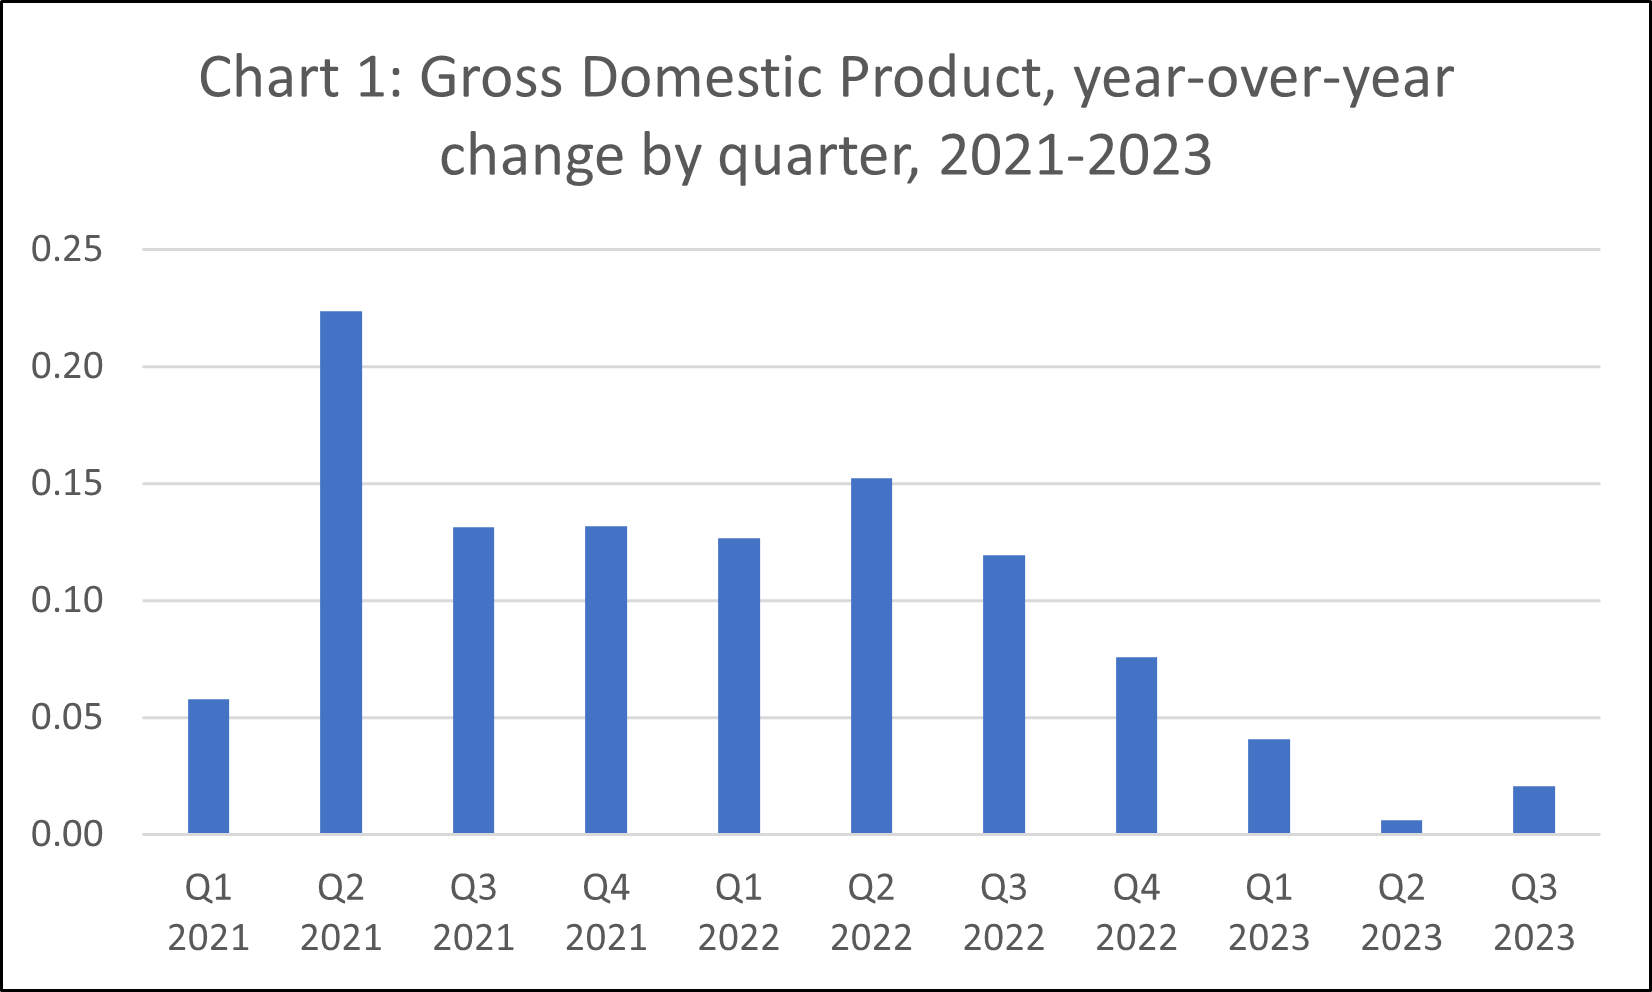 Bar graph: Gross Domestic Product, year-over-year change by quarter, 2021-2023